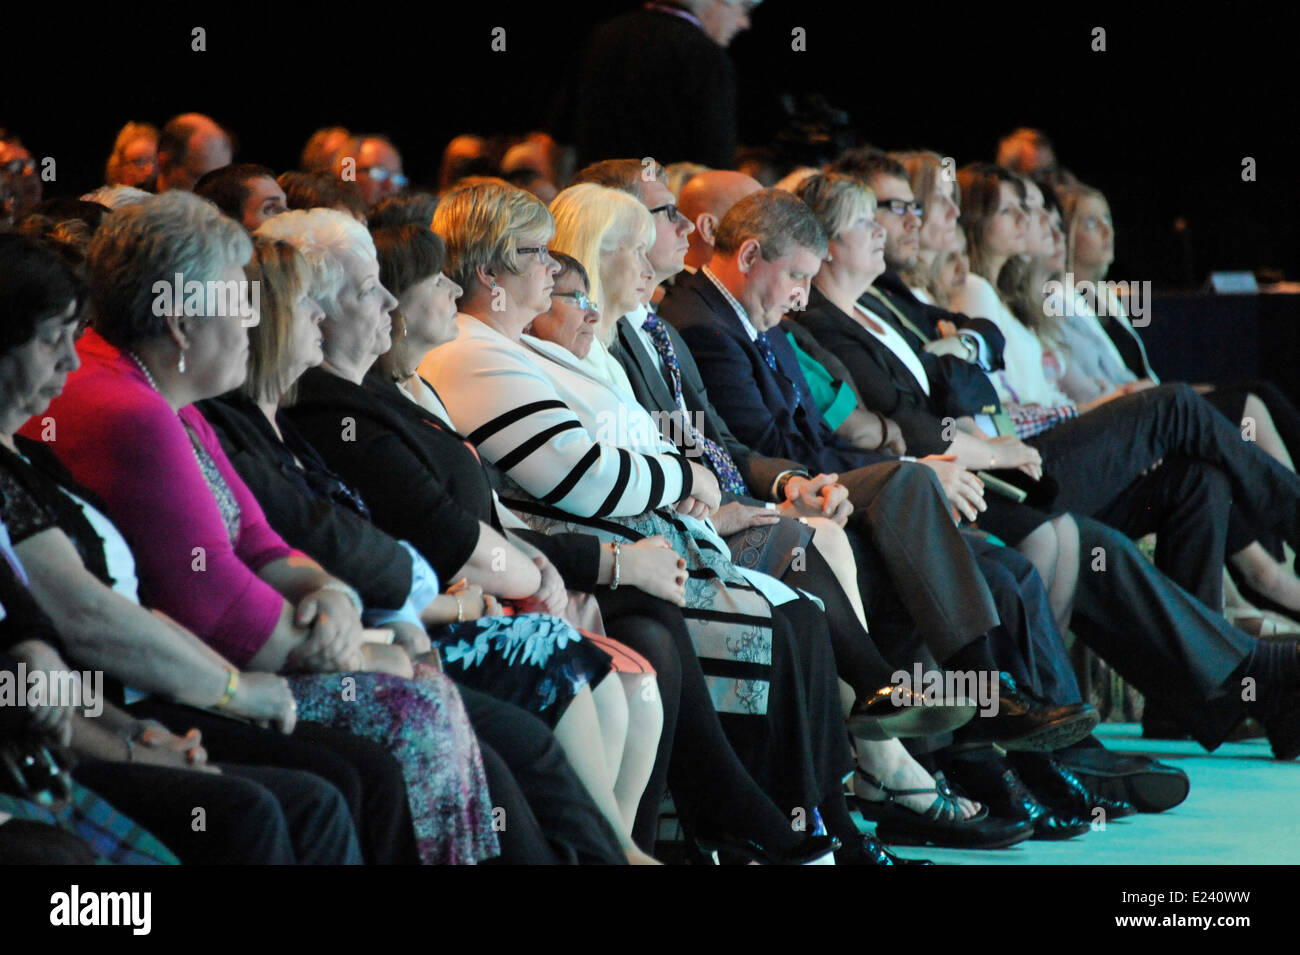 Liverpool UK 15th June 2014. RCN - Royal College of Nurses Annual Congress opens in Liverpool today. Credit:  GeoPic / Alamy Live News Stock Photo